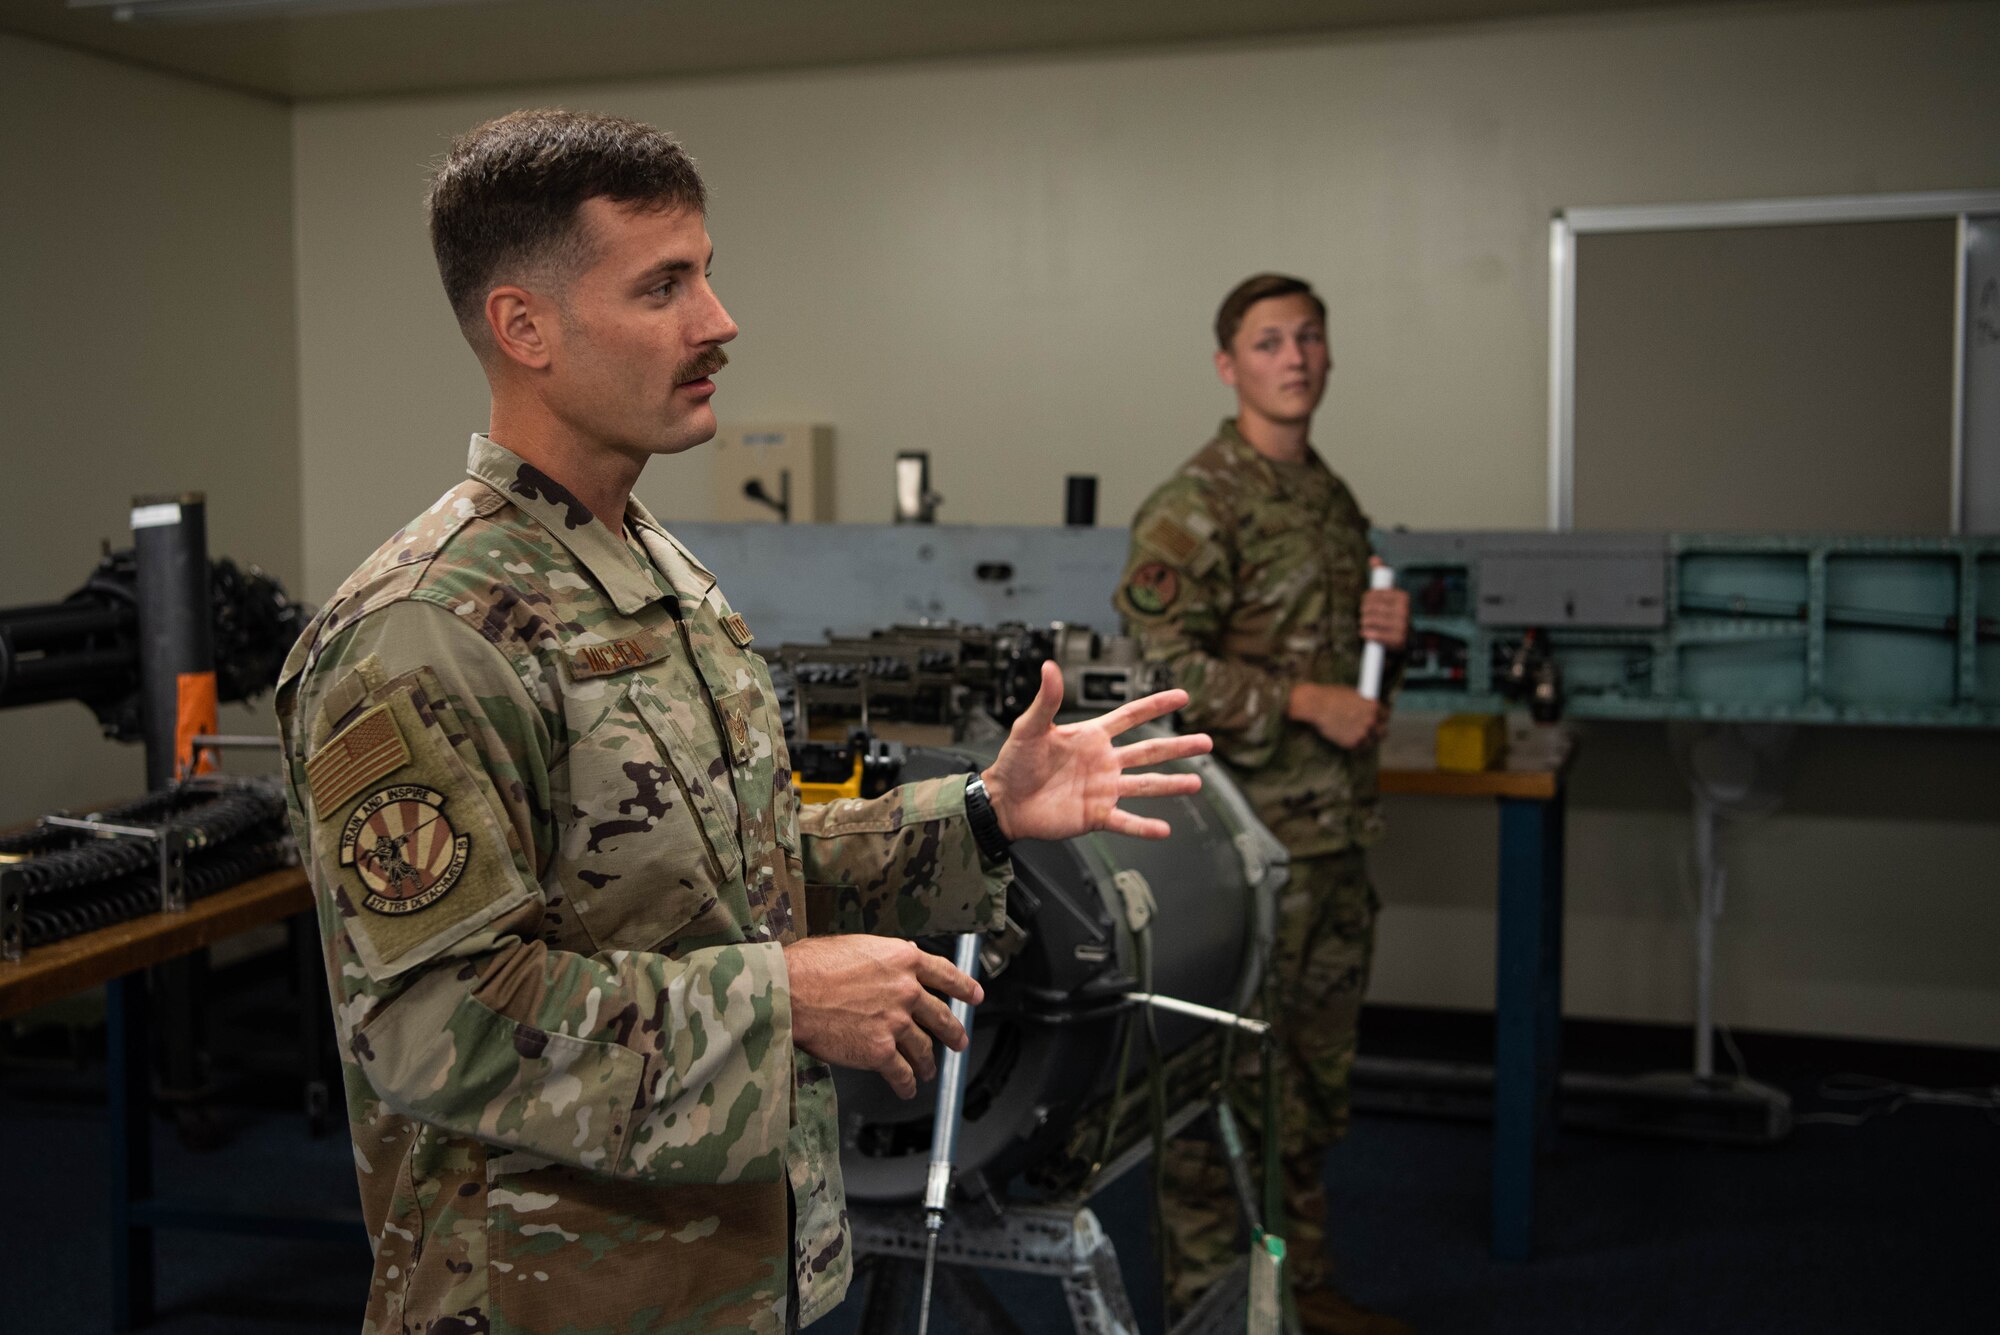 An Airman gives a presentation on weapons systems.